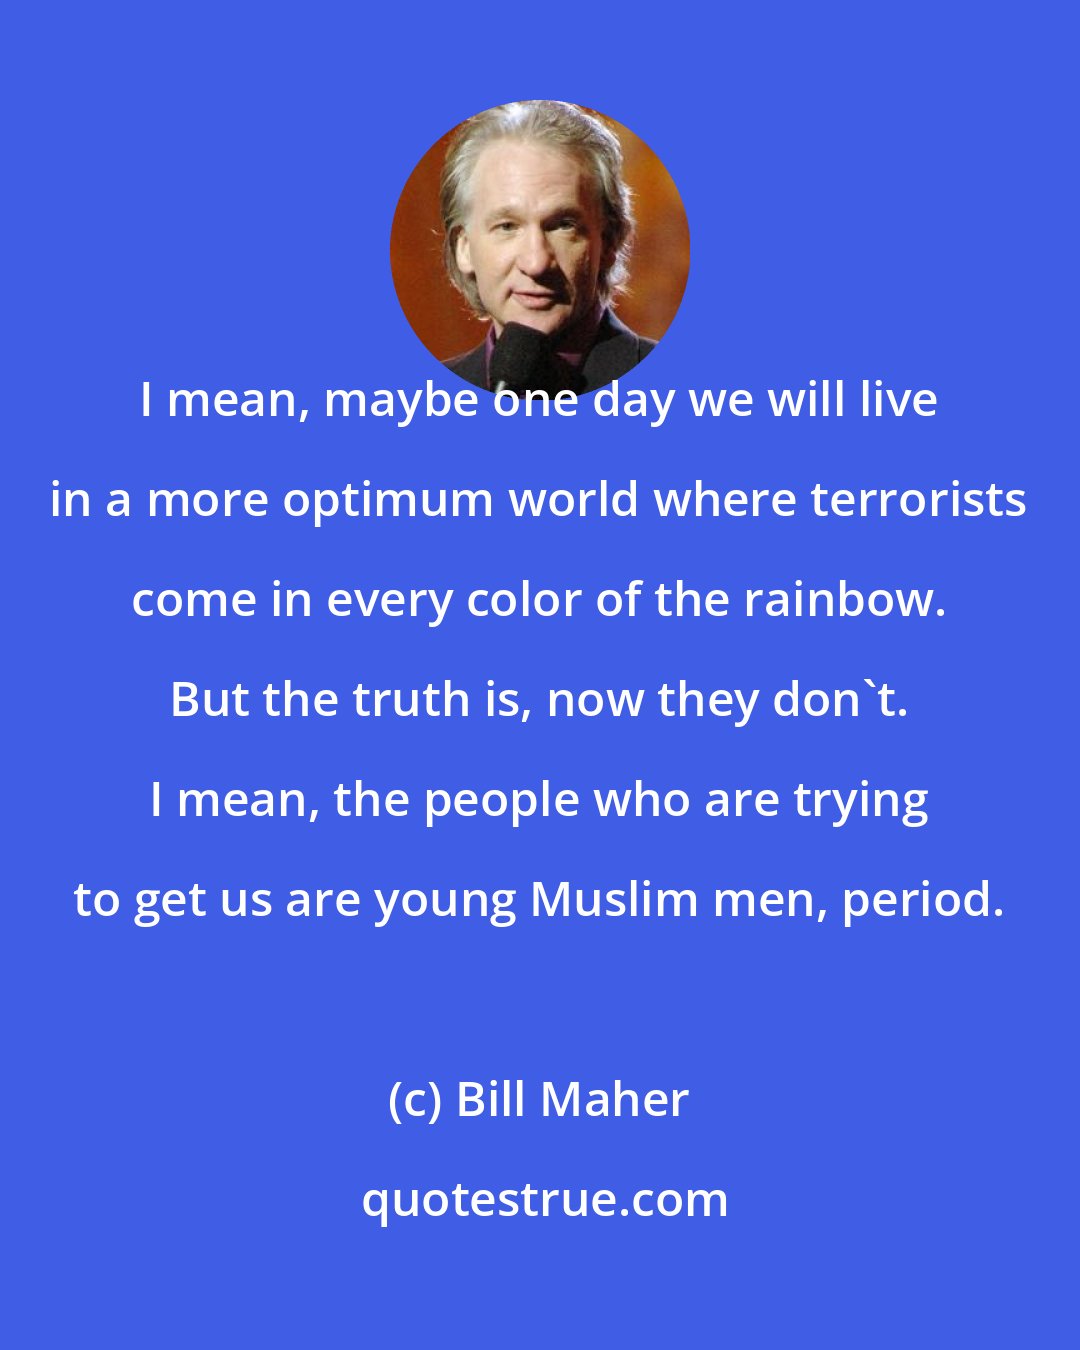 Bill Maher: I mean, maybe one day we will live in a more optimum world where terrorists come in every color of the rainbow. But the truth is, now they don't. I mean, the people who are trying to get us are young Muslim men, period.